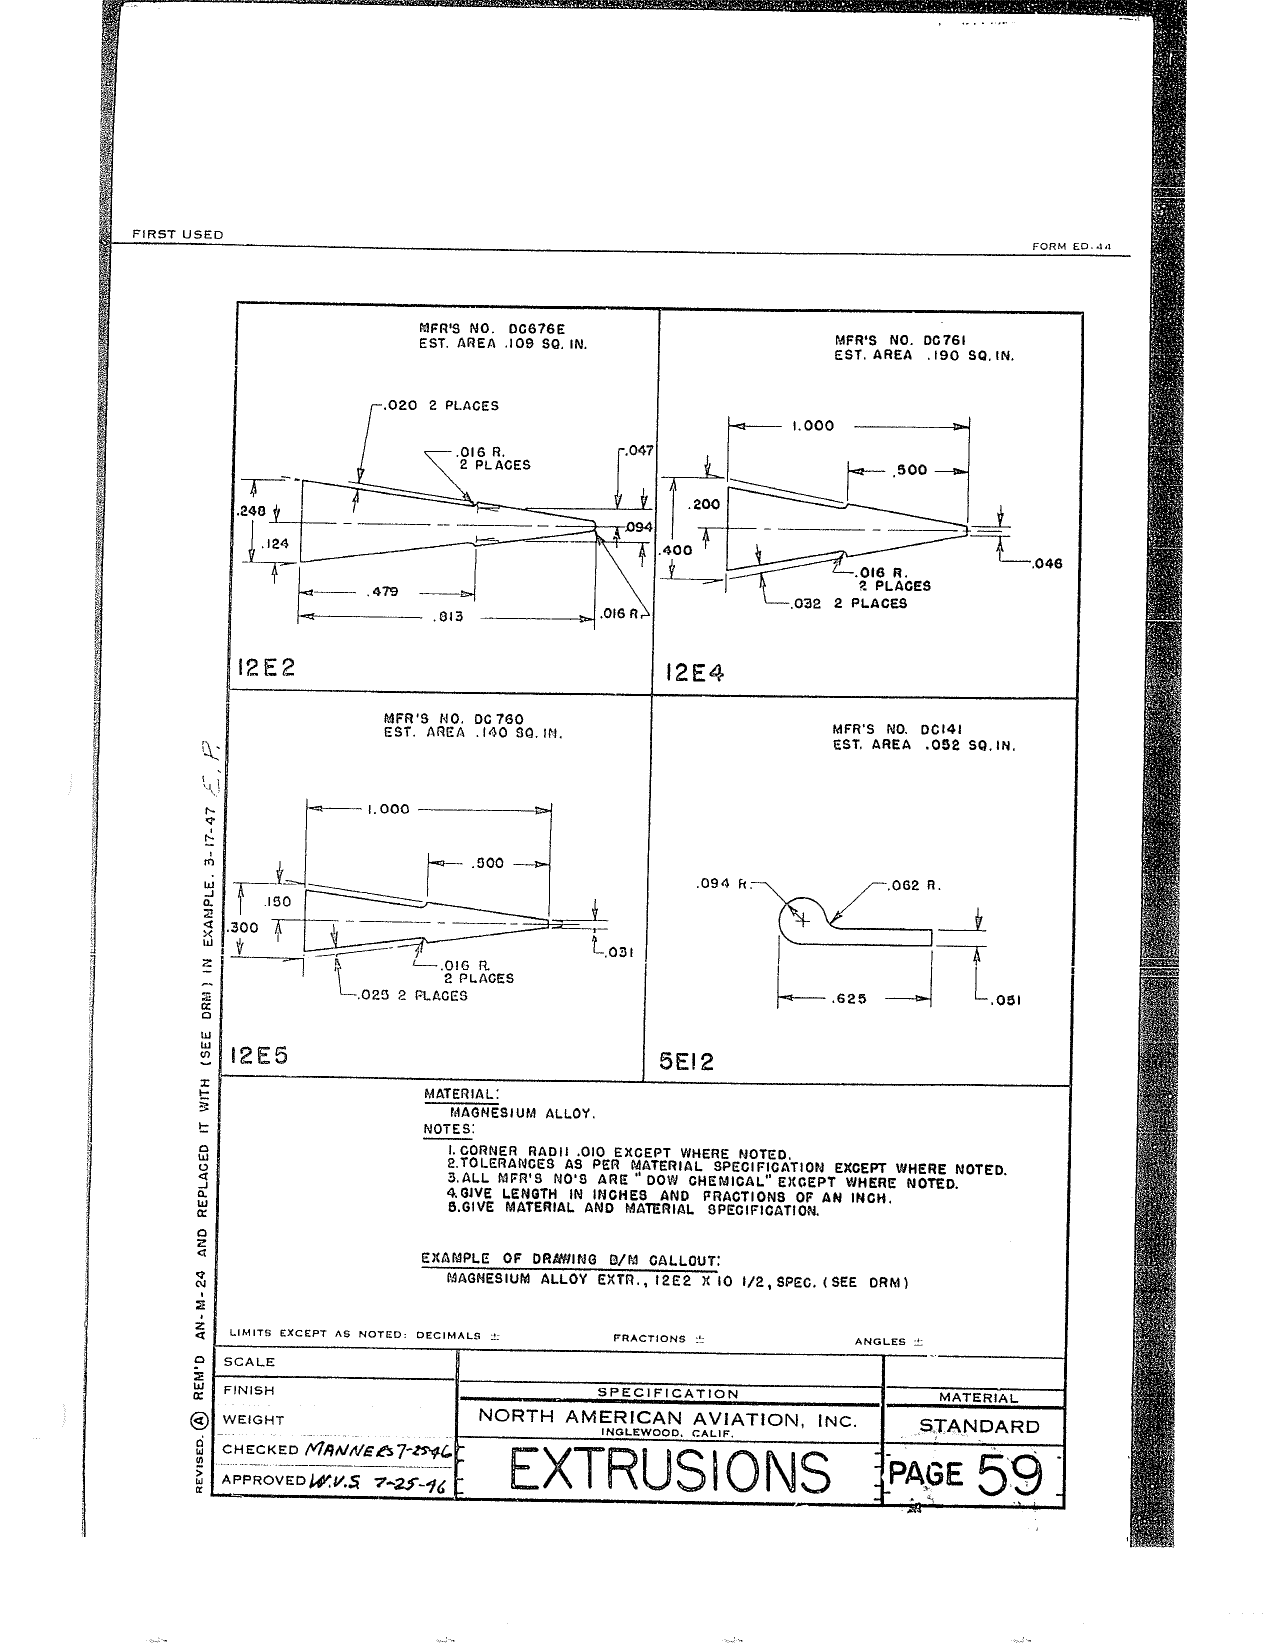 Sample page 88 from AirCorps Library document: Extrusions - North American Aviation